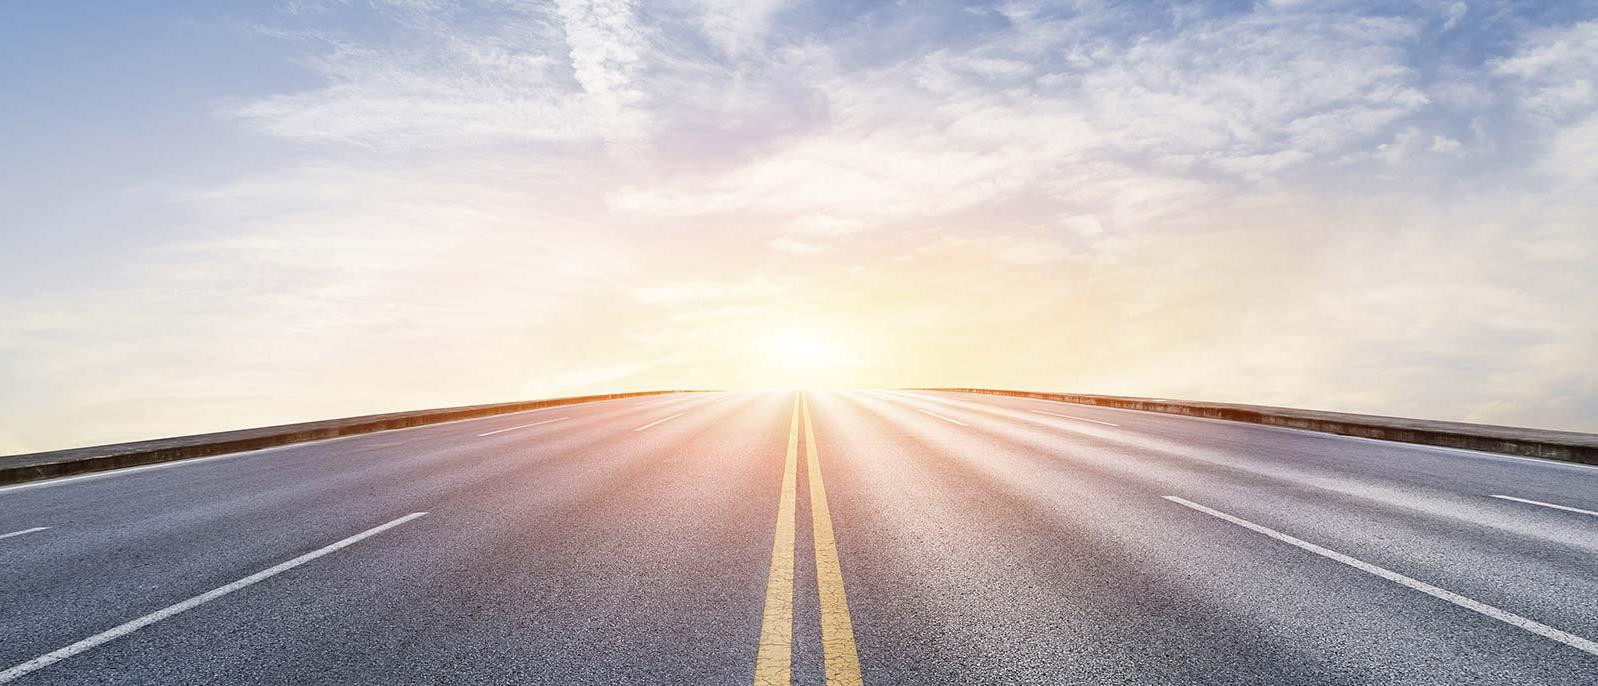 Background Image | Bright Open Road